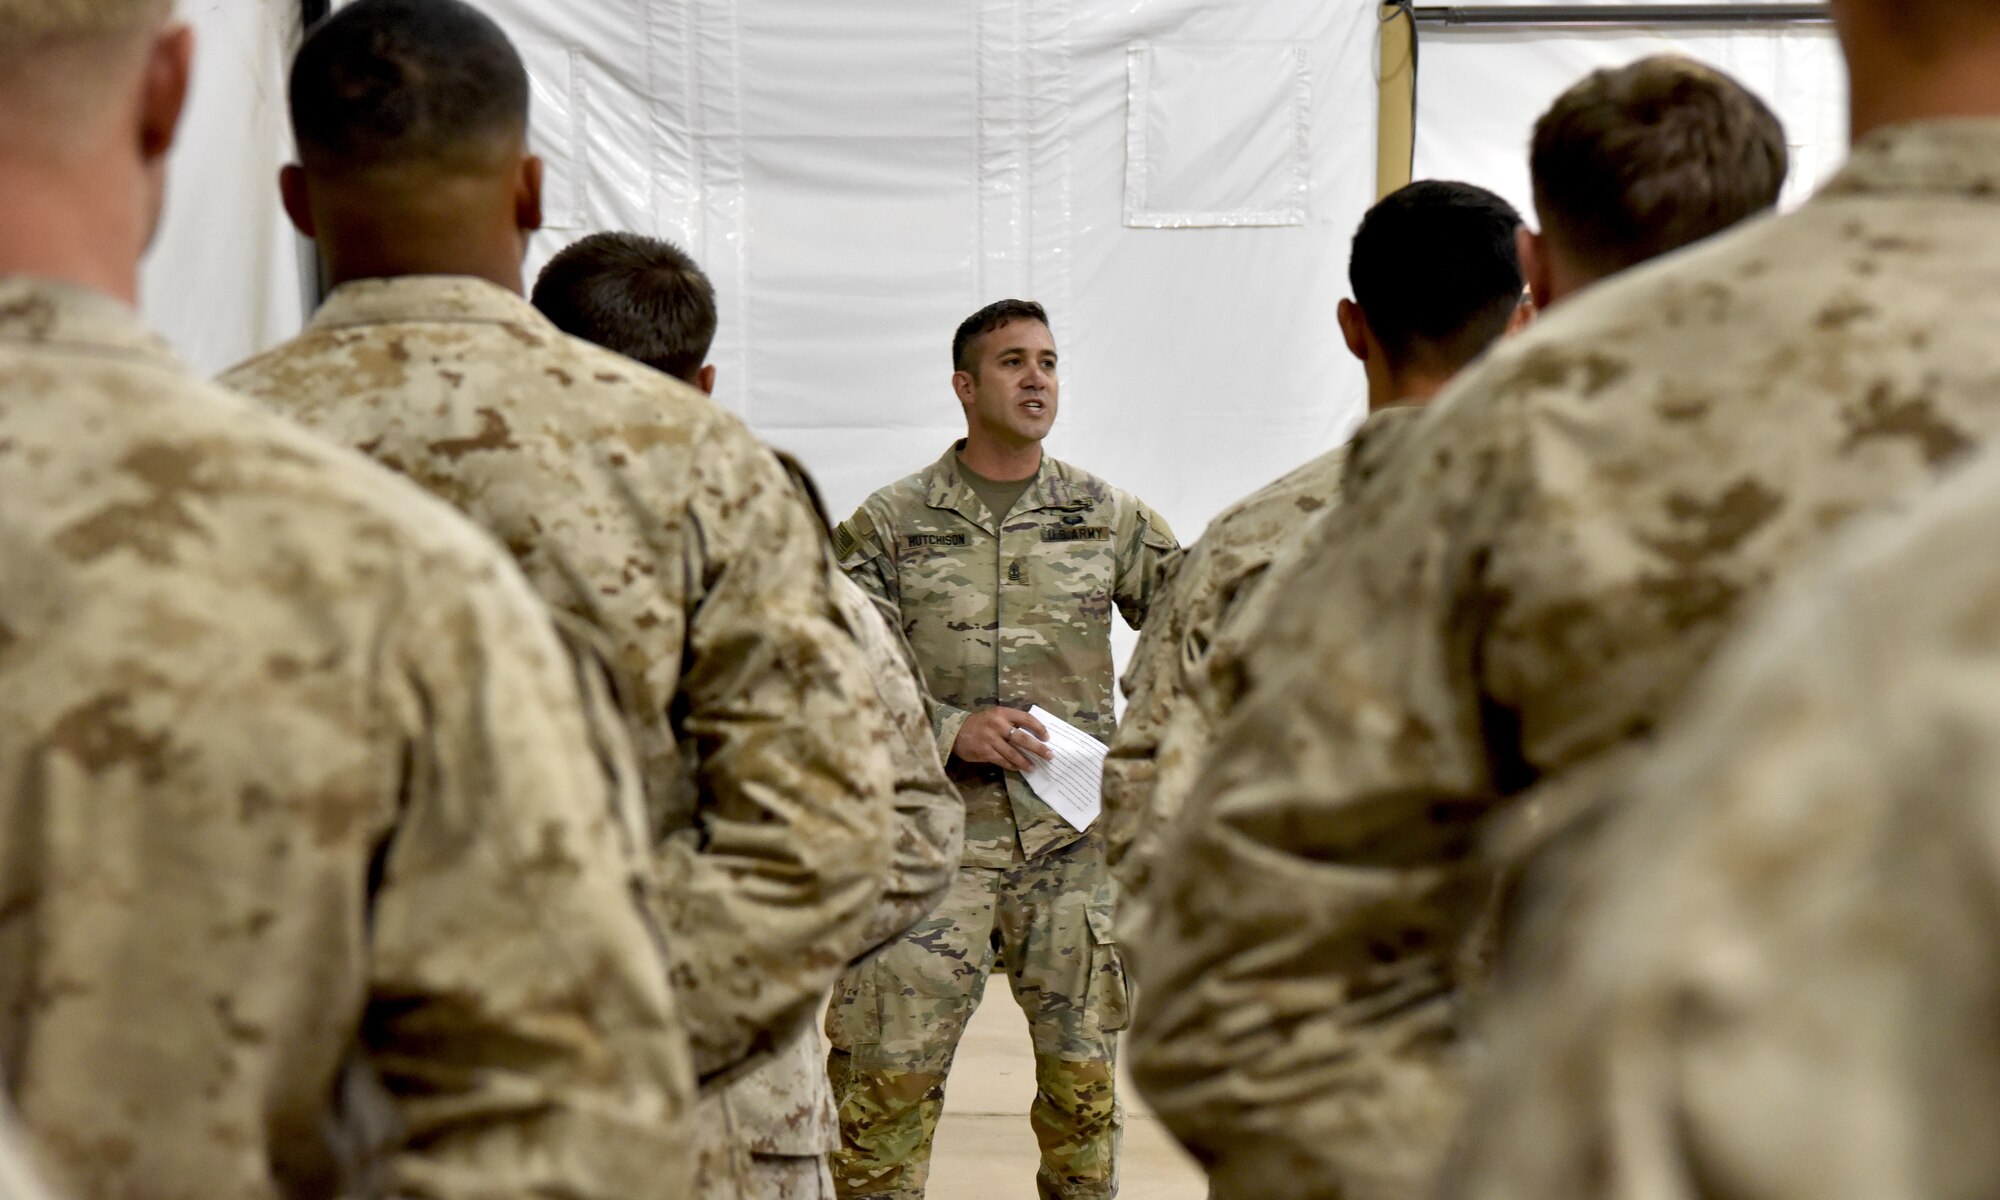 Sixty U.S. Marines with Mari.ne Attack Squadron 214 complete their Corporals Course at Prince Sultan Air Base, Kingdom of Saudi Arabia